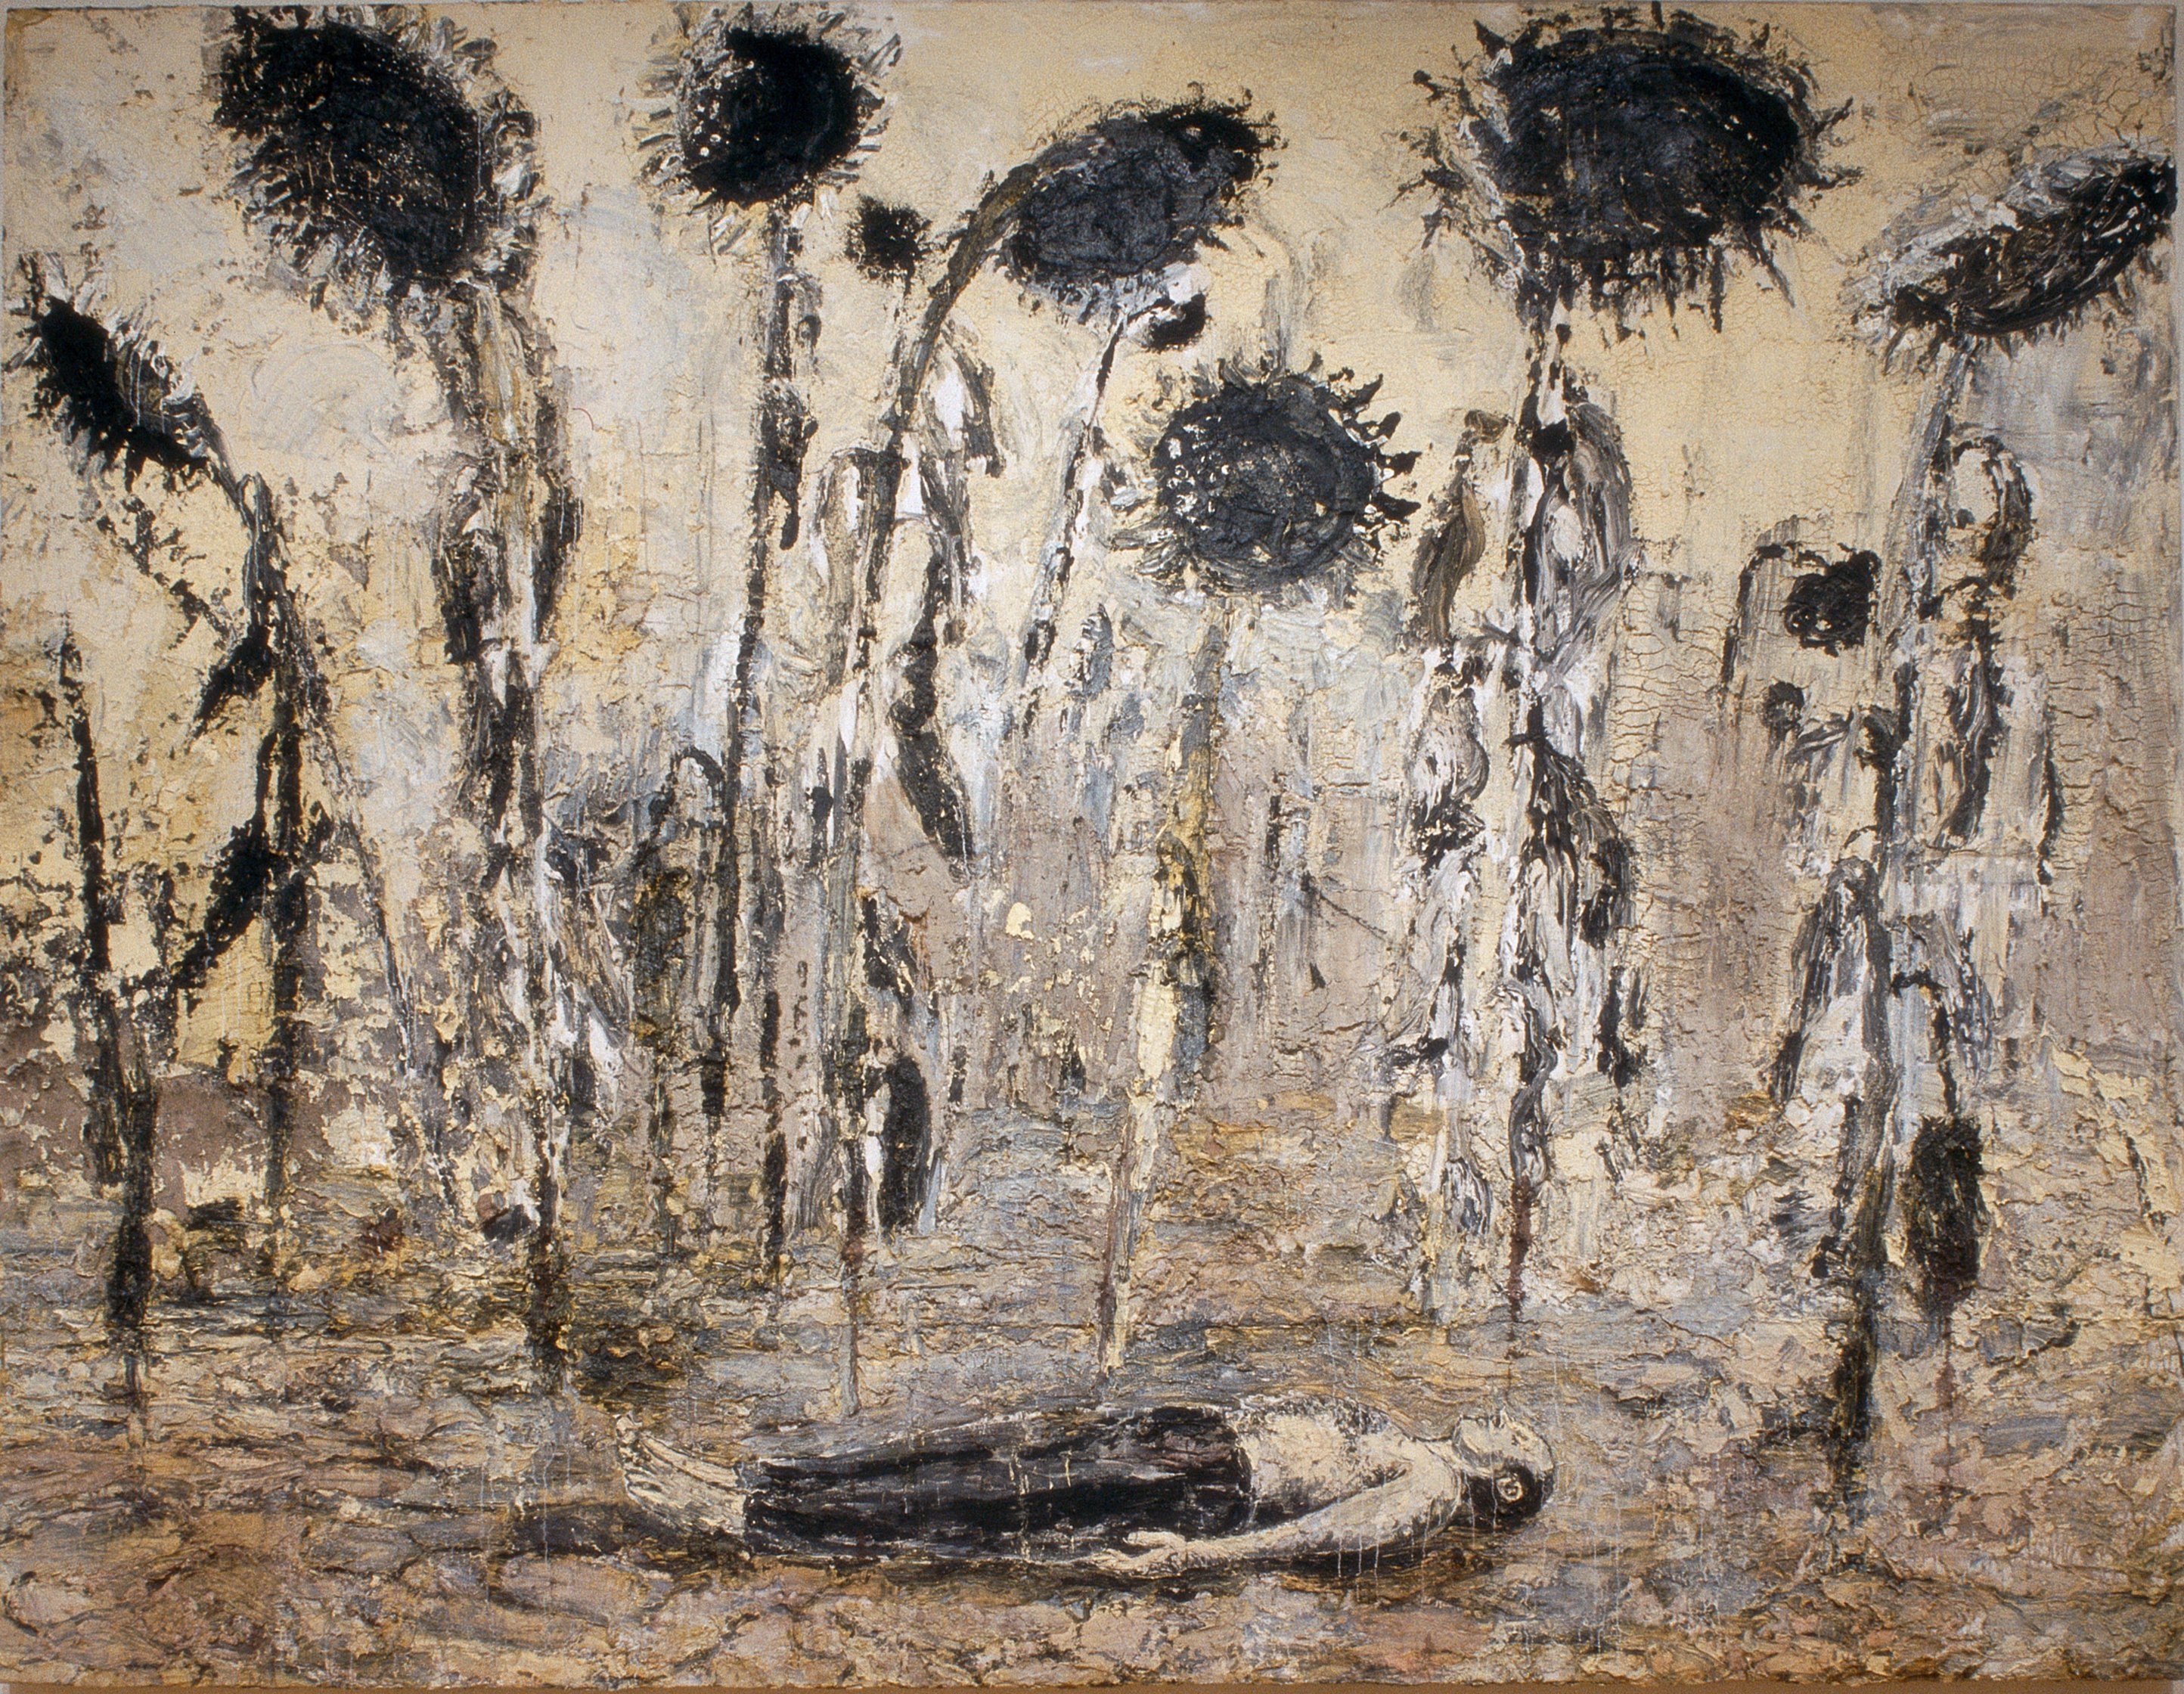 'The Orders of the Night', 1996, by Anselm Kiefer, courtesy of Royal Academy